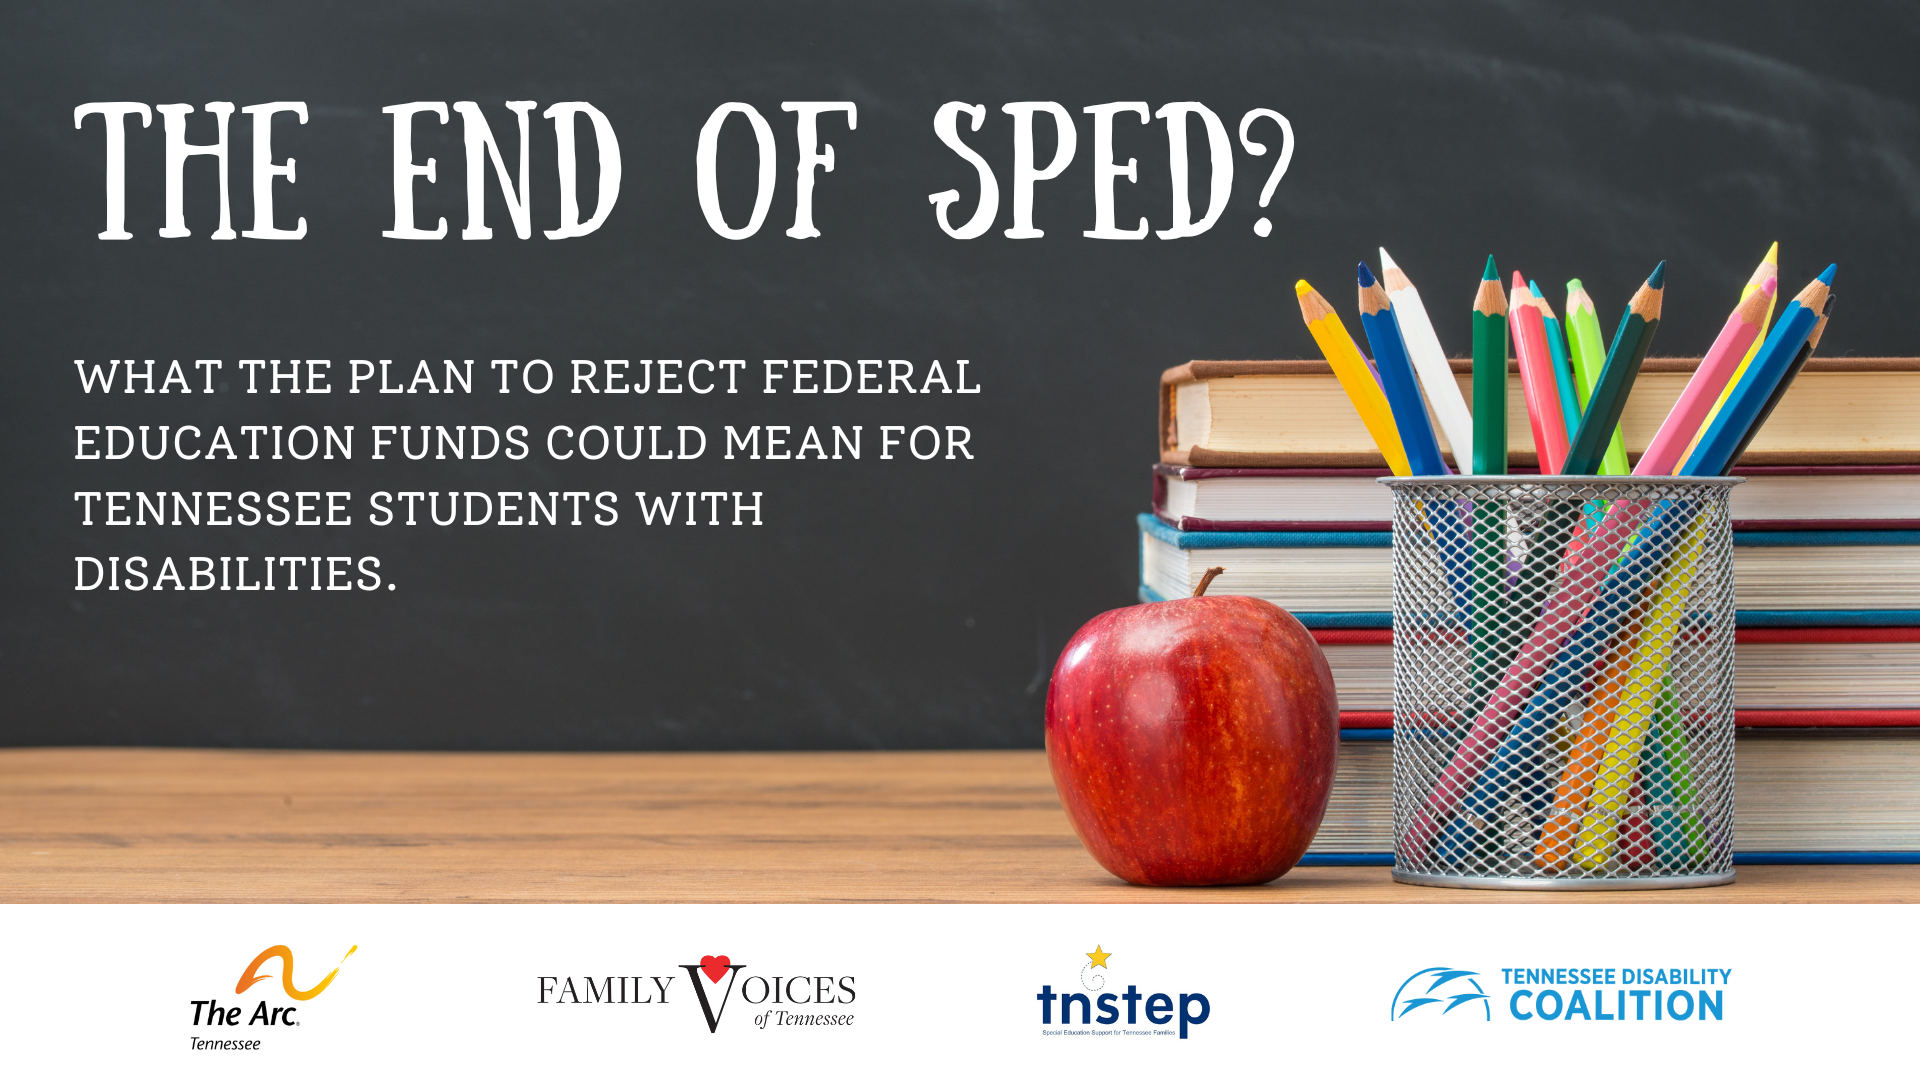 Event Flyer: The end of SPED? What the plan to reject federal funds could mean for Tennessee students with disabilities.  Below the text are the following logos: The Arc of Tennessee, Family Voices of Tennessee, TNSTEP, and the Tennessee Disability Coalition. 